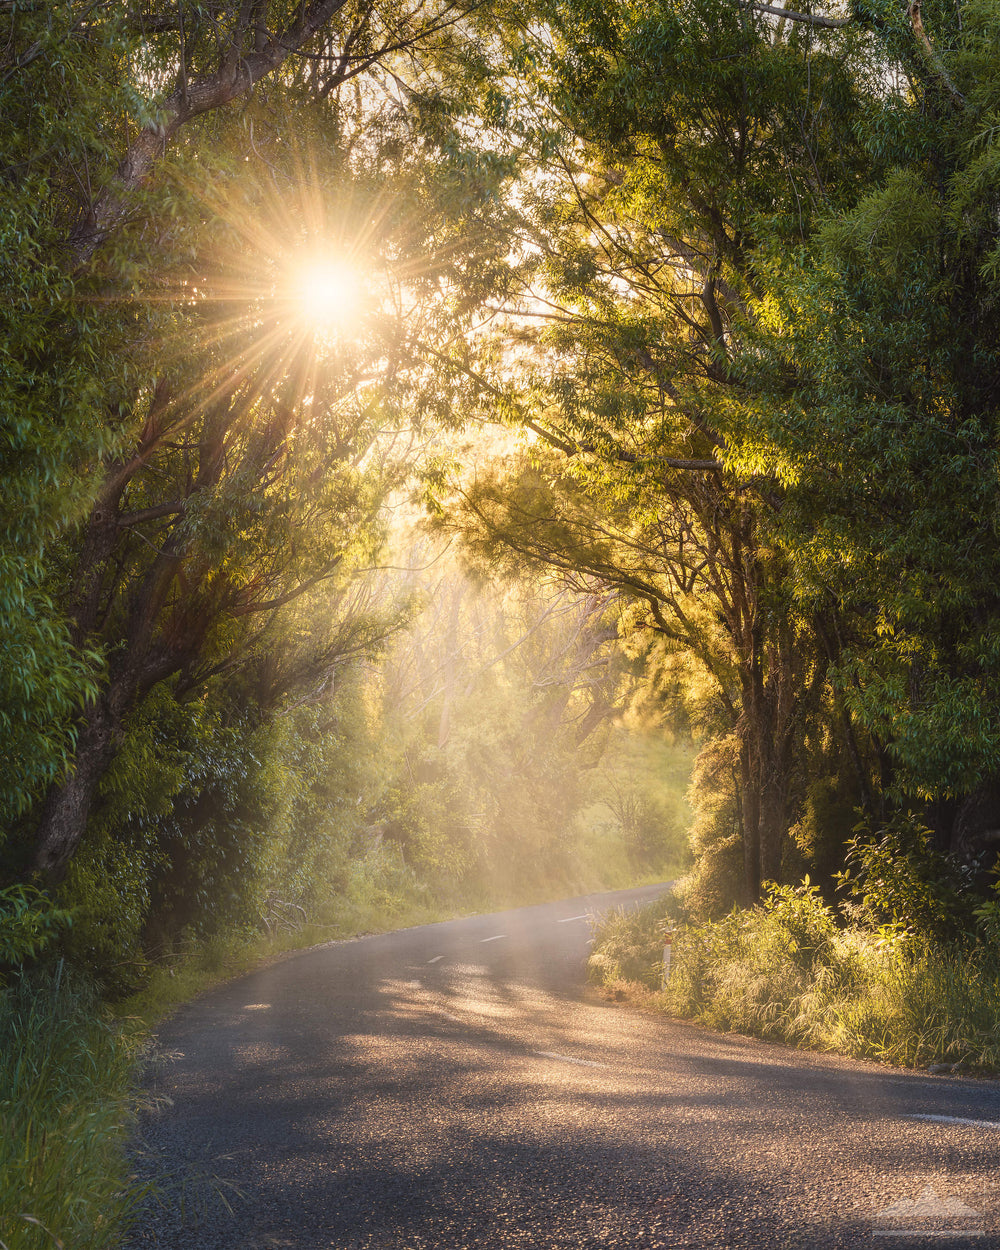 Vertical photo of a winding road, surrounded by trees and sun rays shining through.